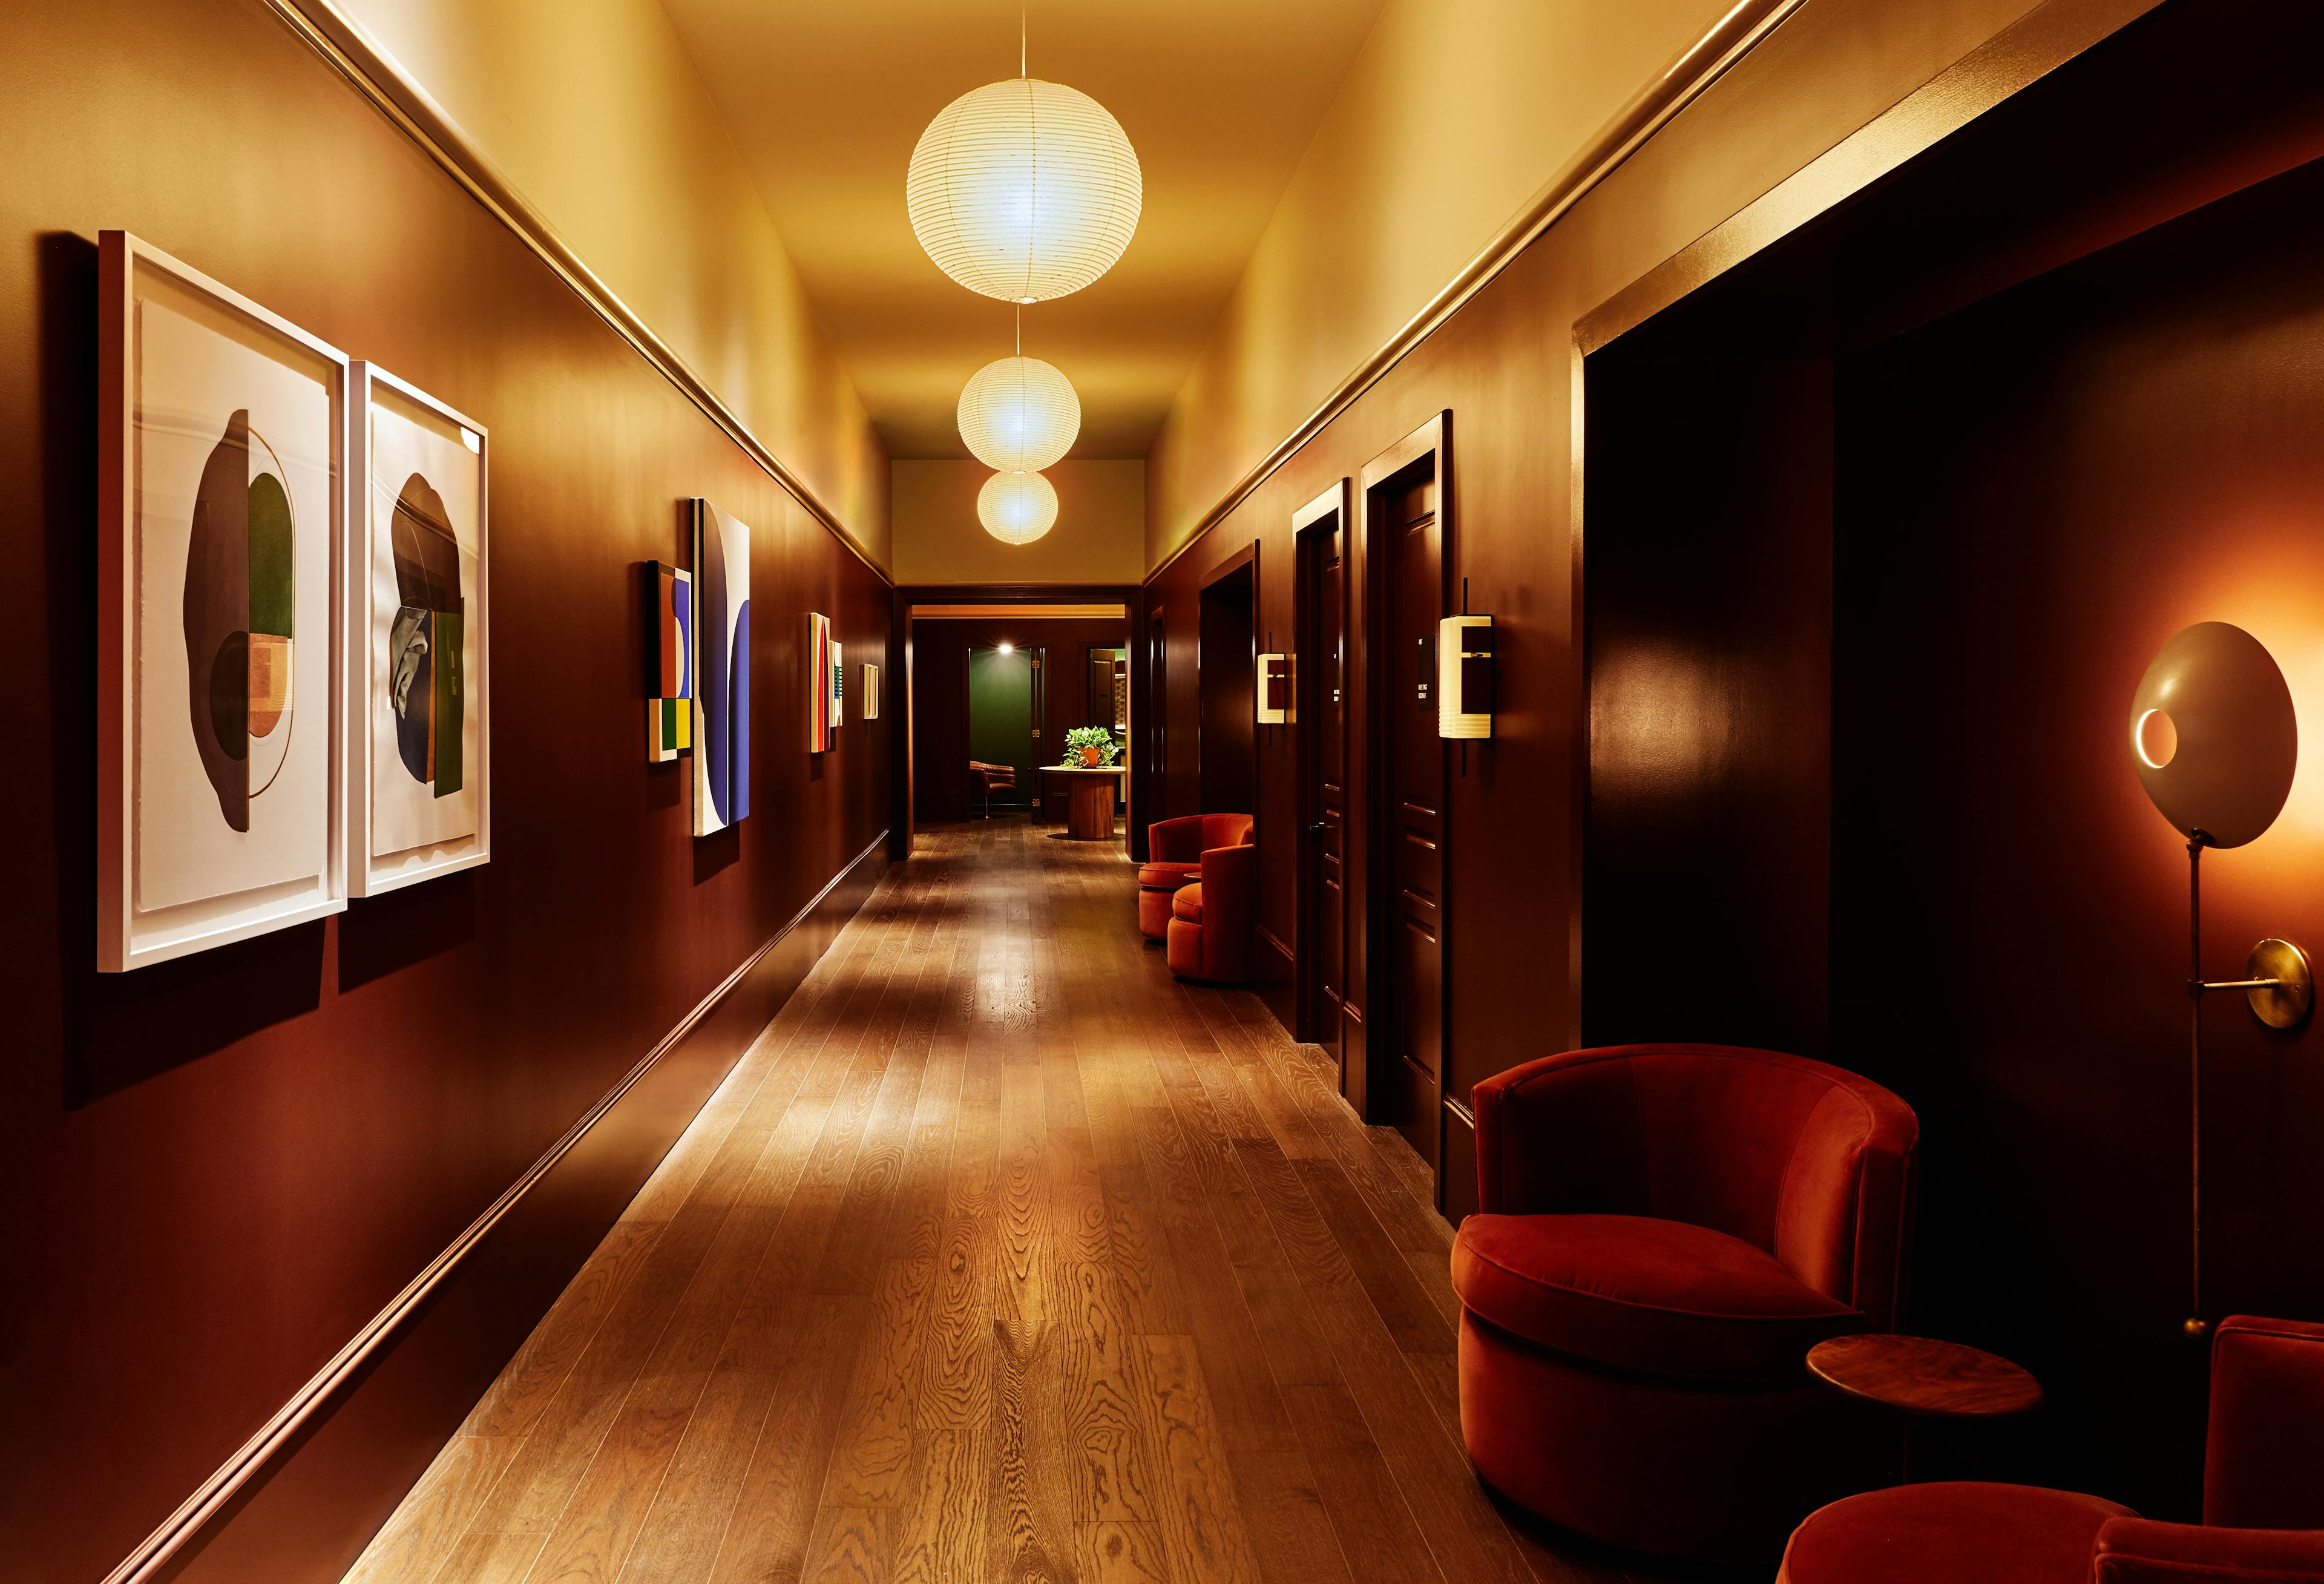 A corridor at the Chief Flatiron Clubhouse with artwork installed on the walls and orb light fixtures installed on the ceiling.